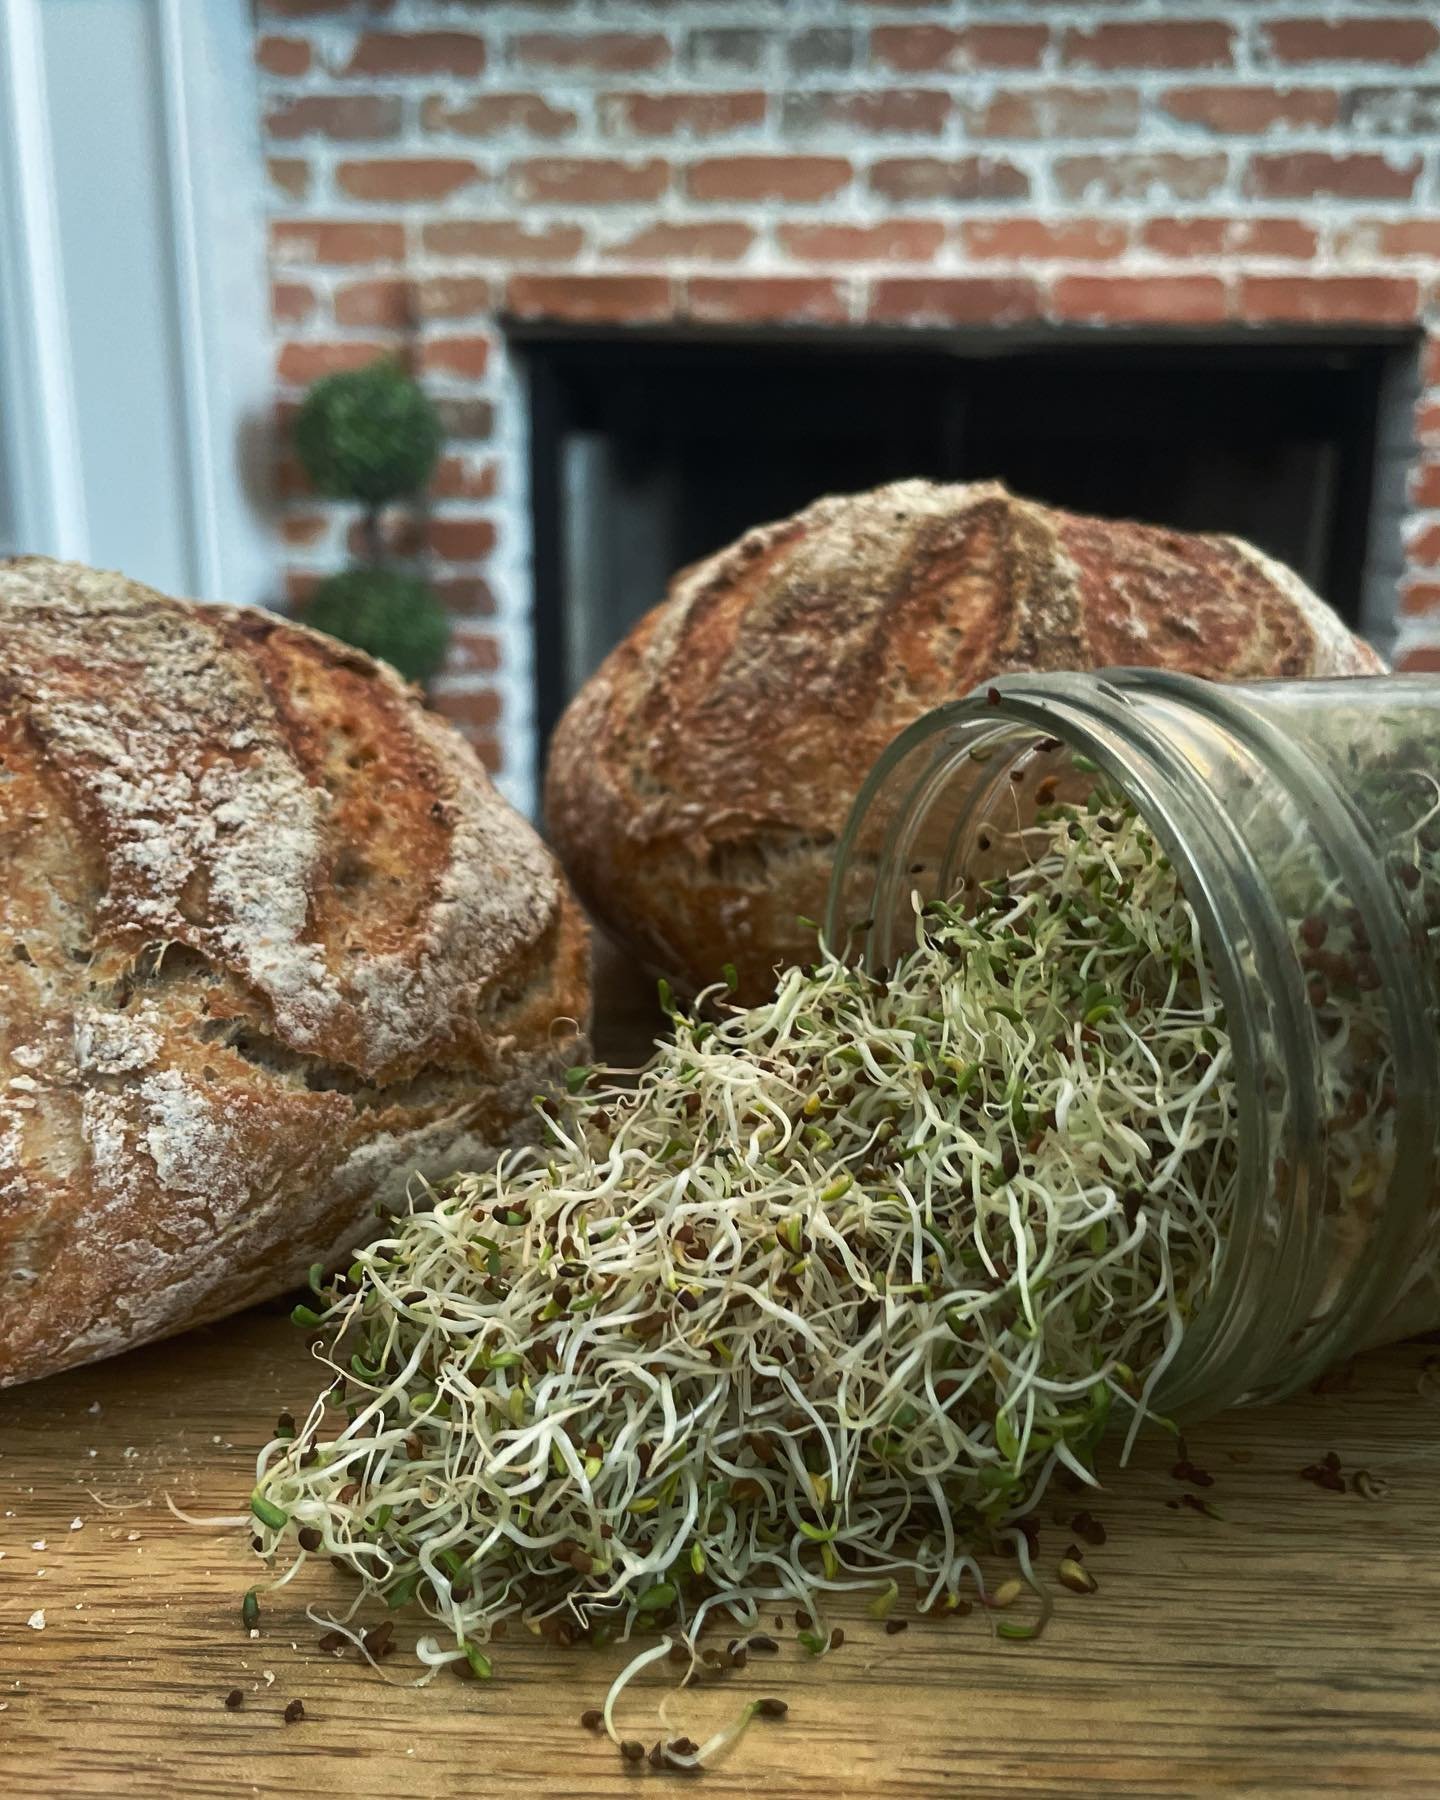 Nothing quite like sprouts and fresh sourdough to start the morning! 🤤 Now just to add a little bit of cheese to that! 🤩

#morningsprouts #sourdough #fresh #healthy #sproutclub #jointheclub #sprouting #sproutlife #organicsprouts #organic #microgree